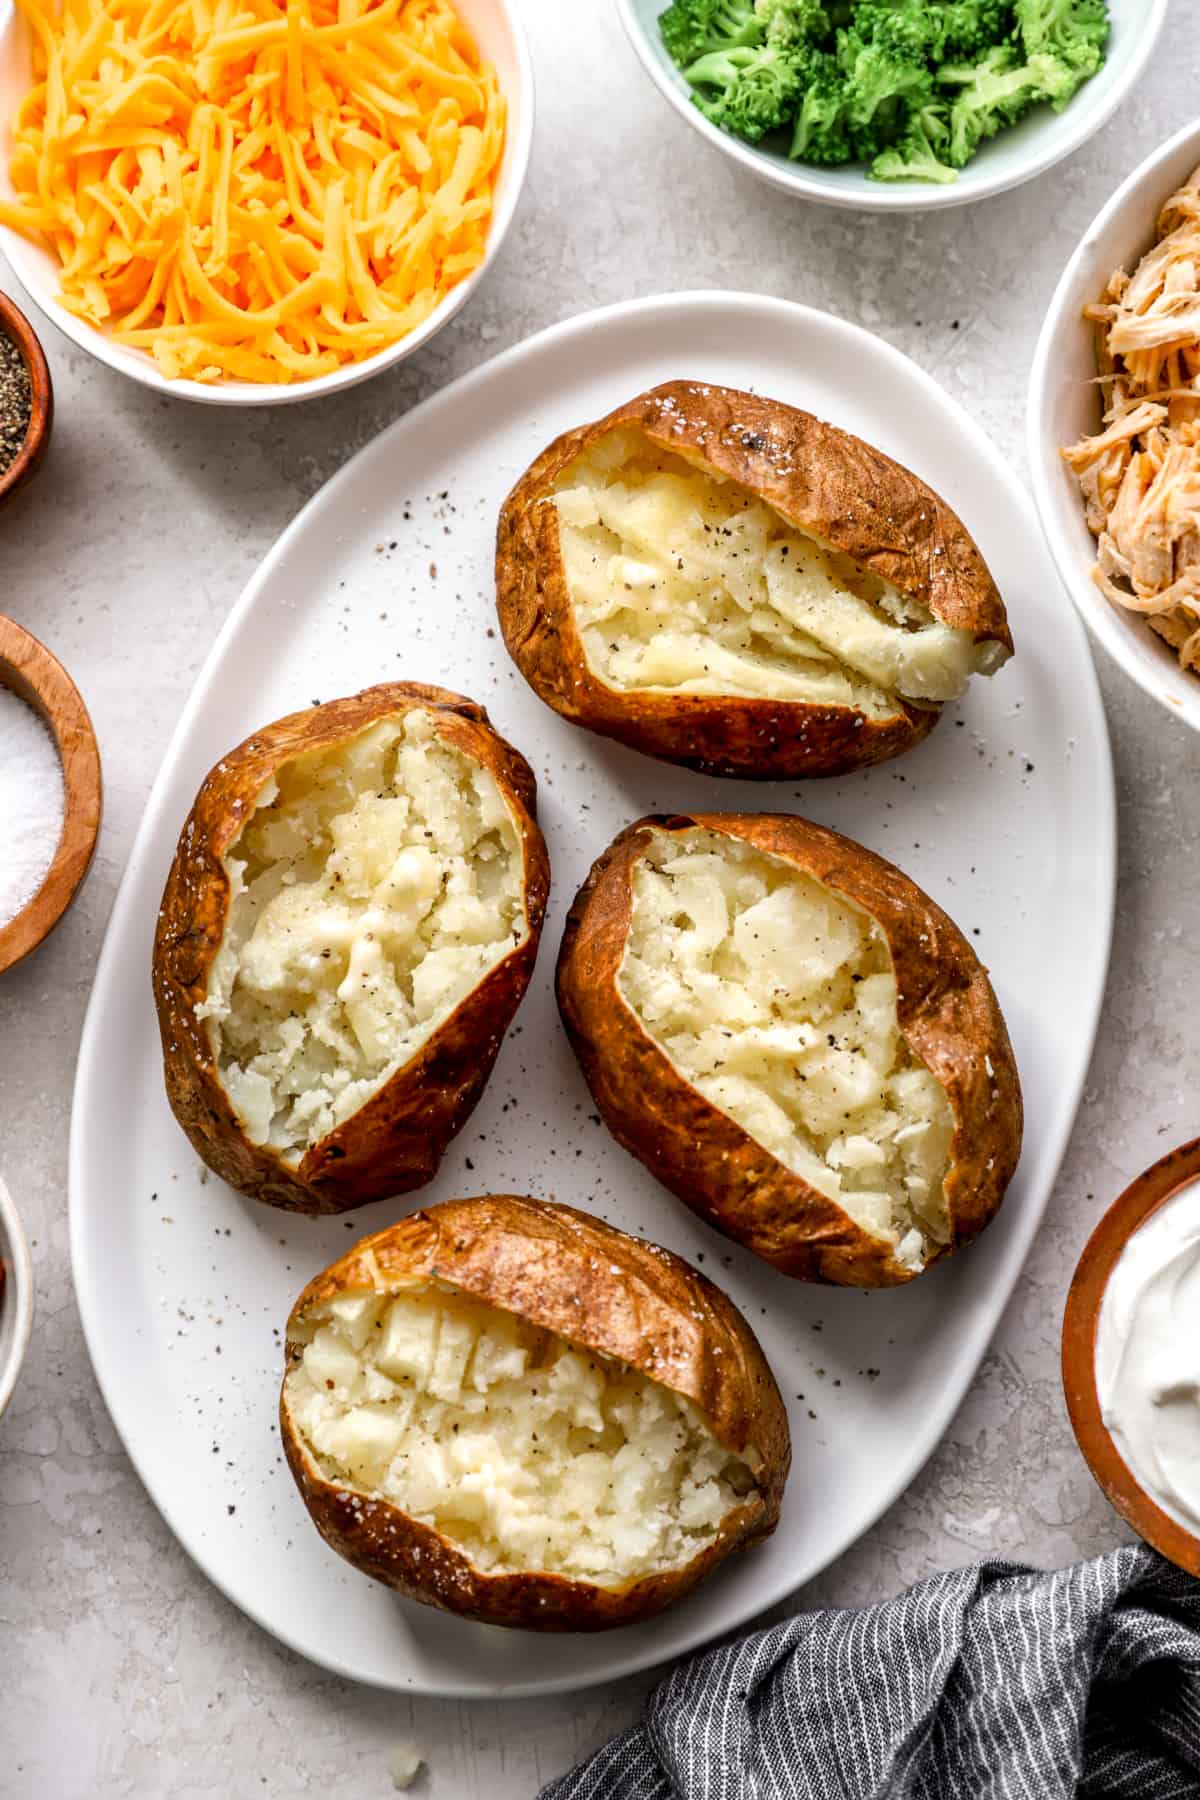 above image of four plain baked potatoes cut open on a plate.